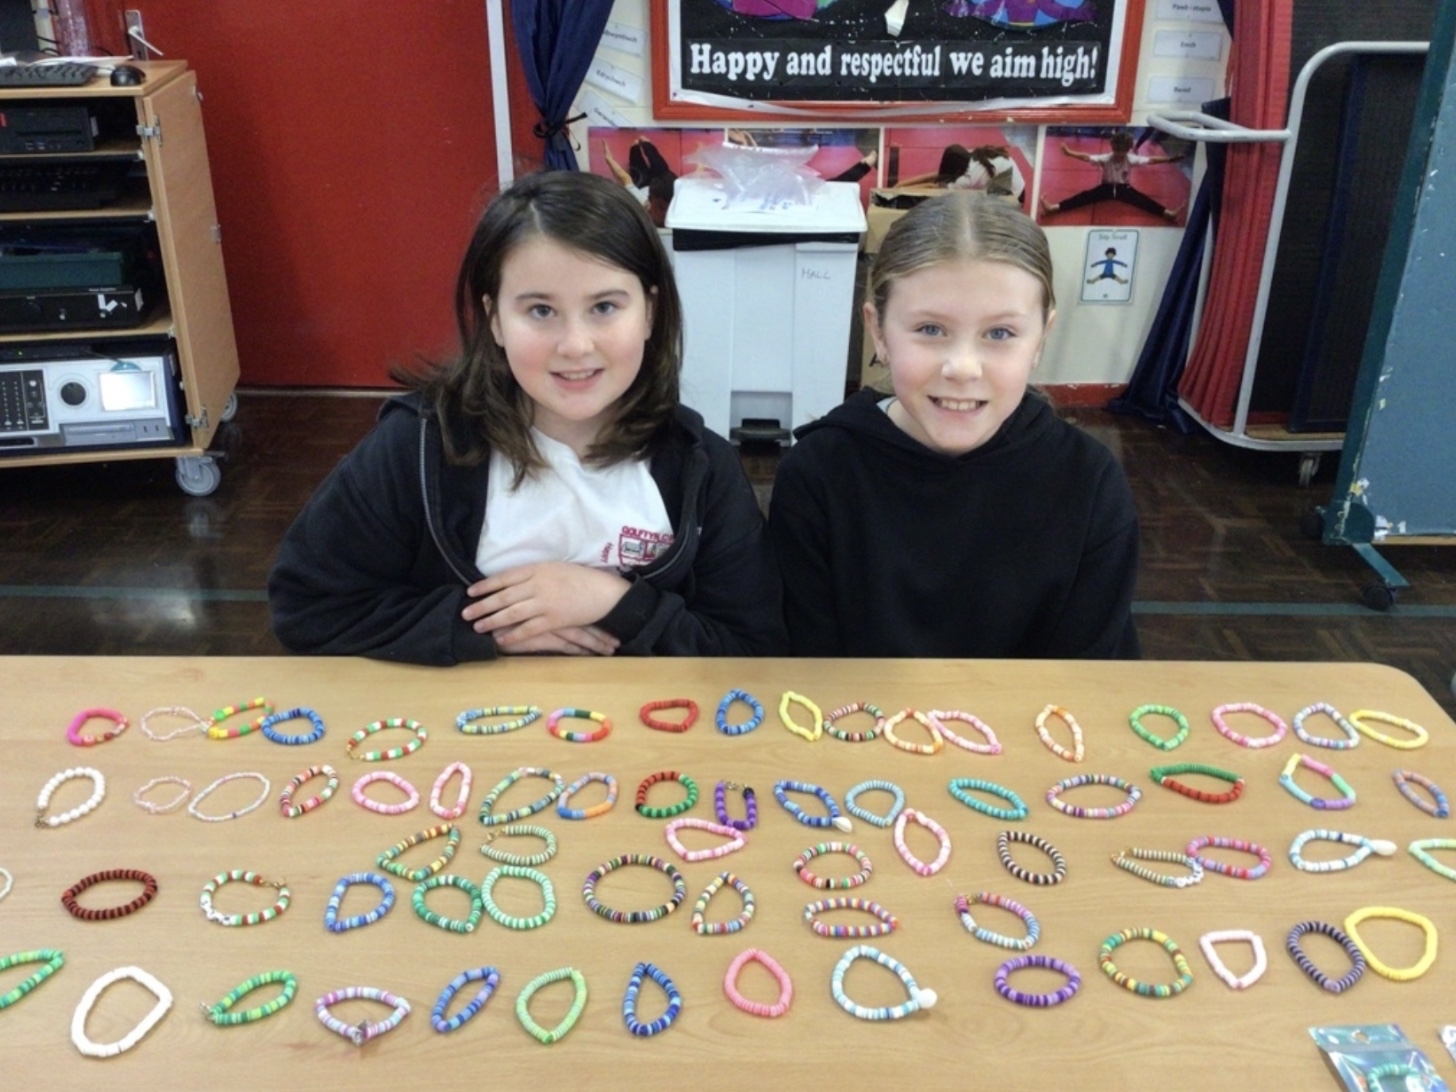 Ava and Jasmine with some of the bracelets the sold for the Red Cross.